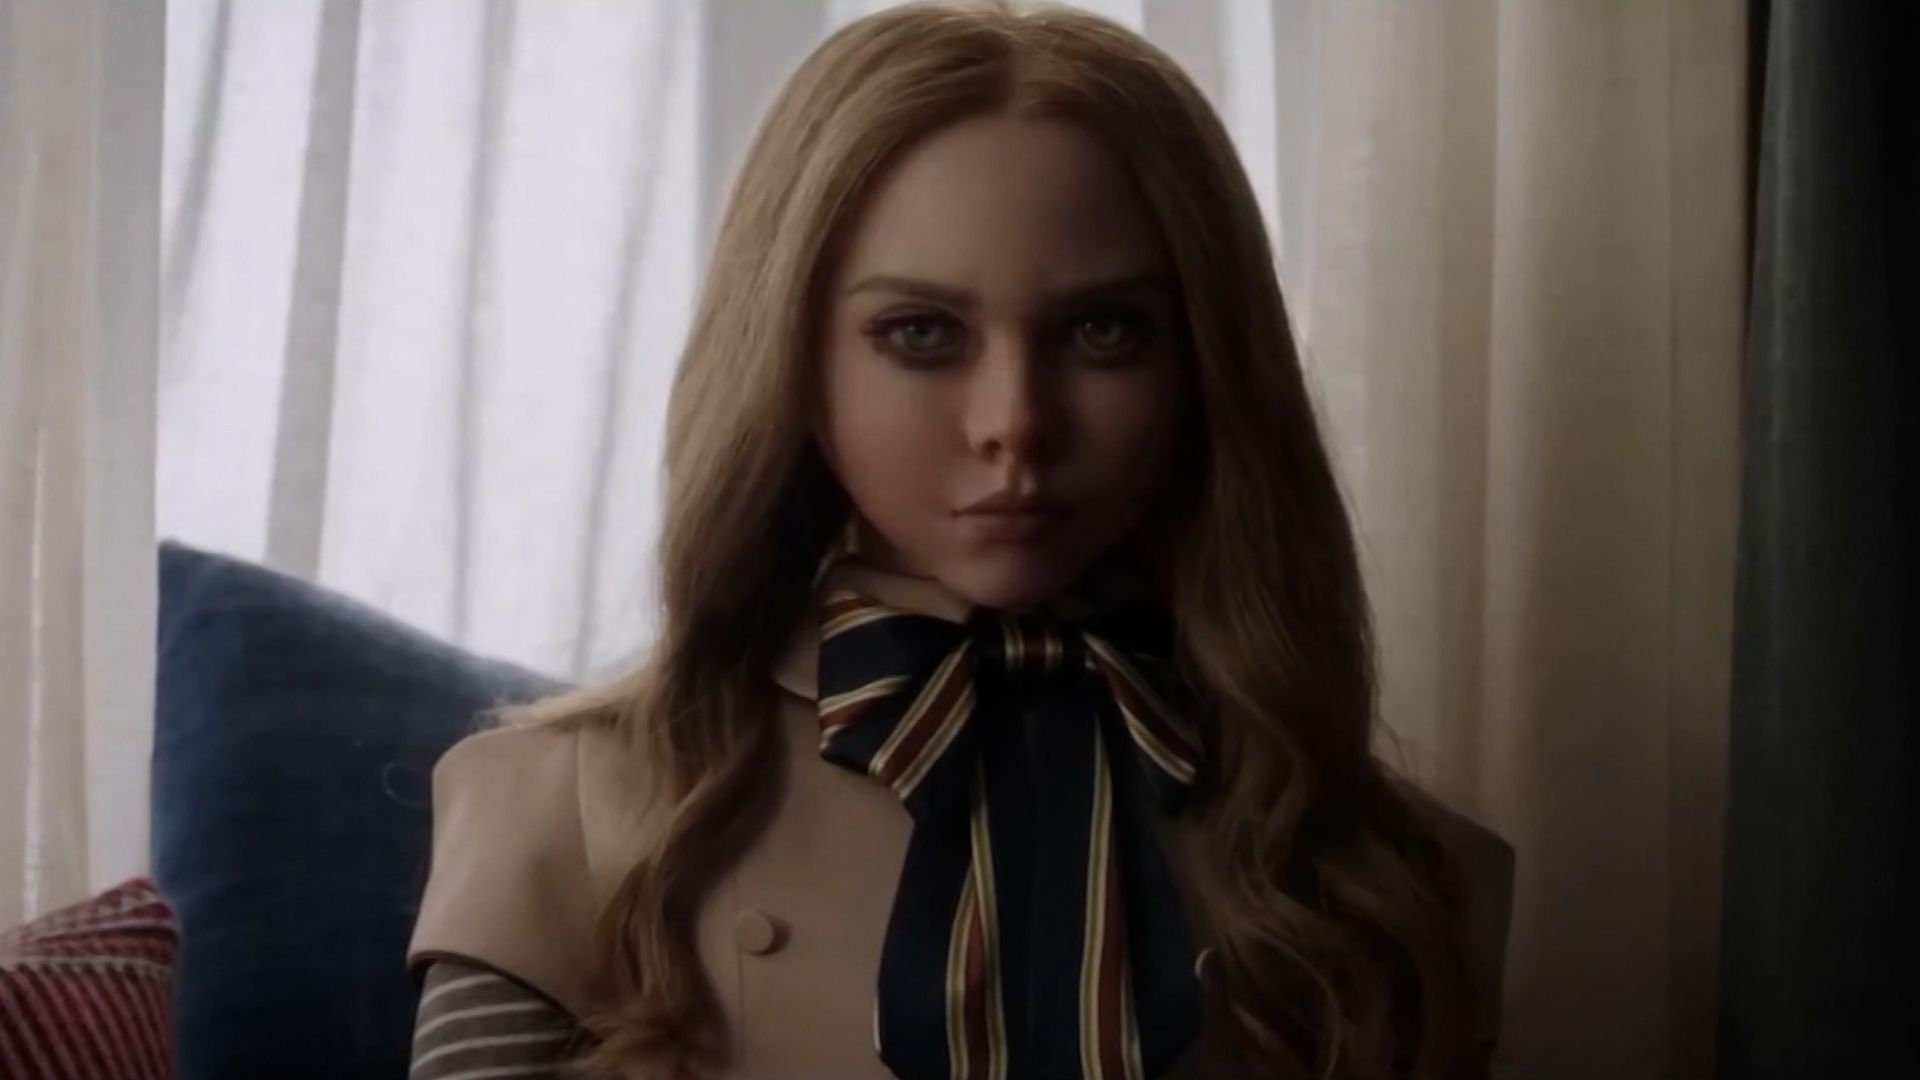 M3GAN, ' the next generation of creepy doll movies, is not playing around